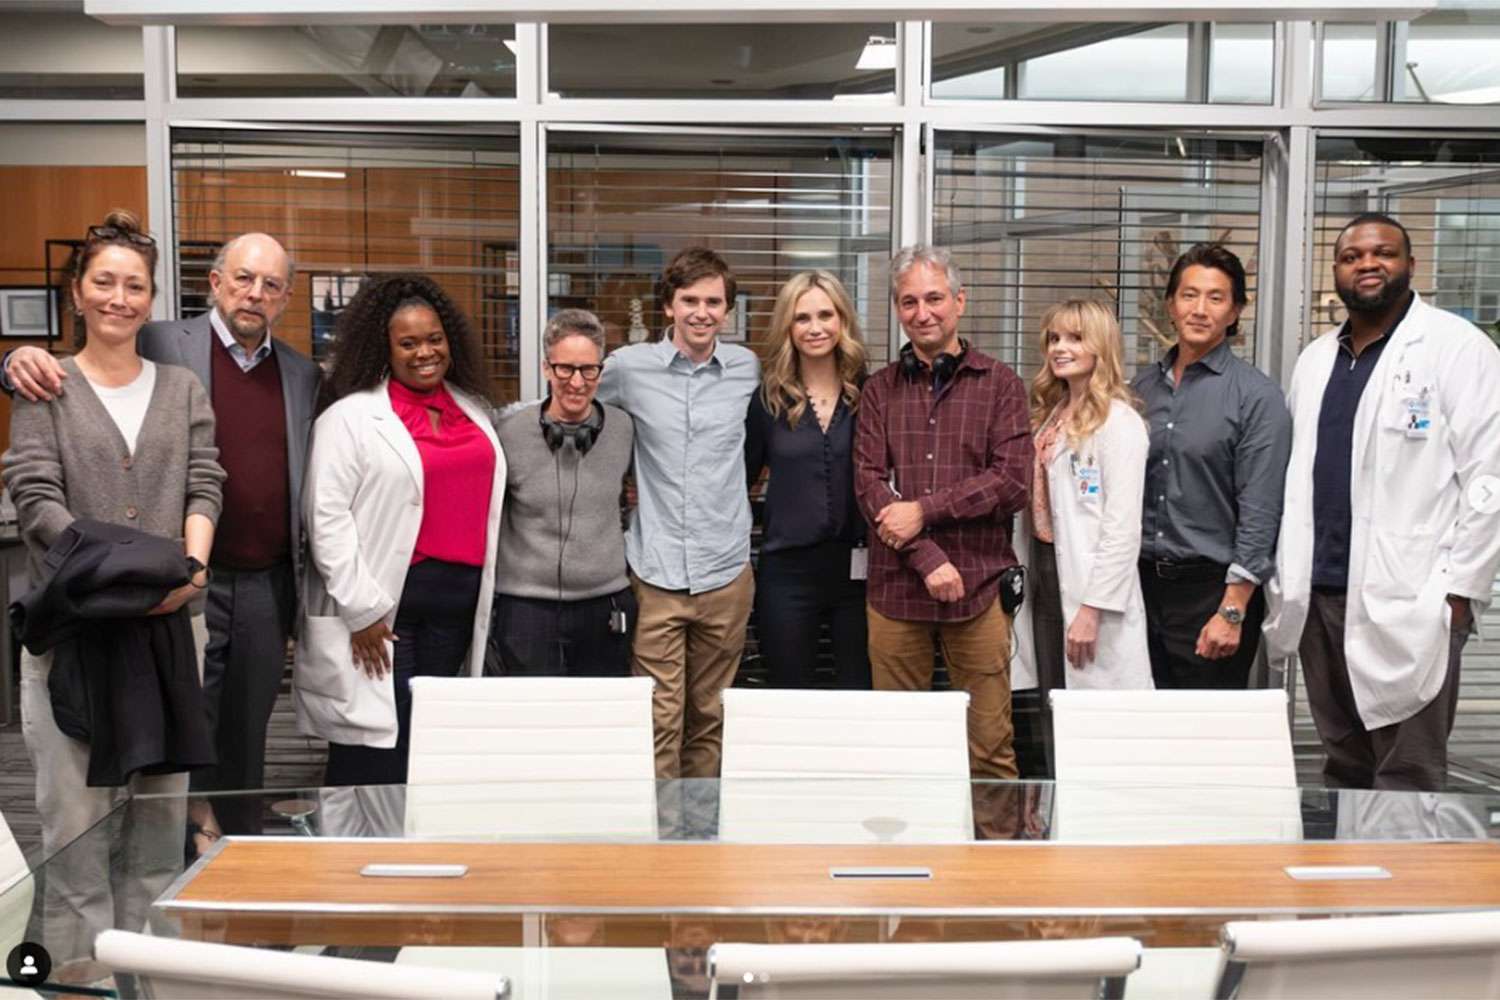 “The Good Doctor ”Cast Reacts to the Series Finale: 'Hoping Our Paths Will Cross Again'